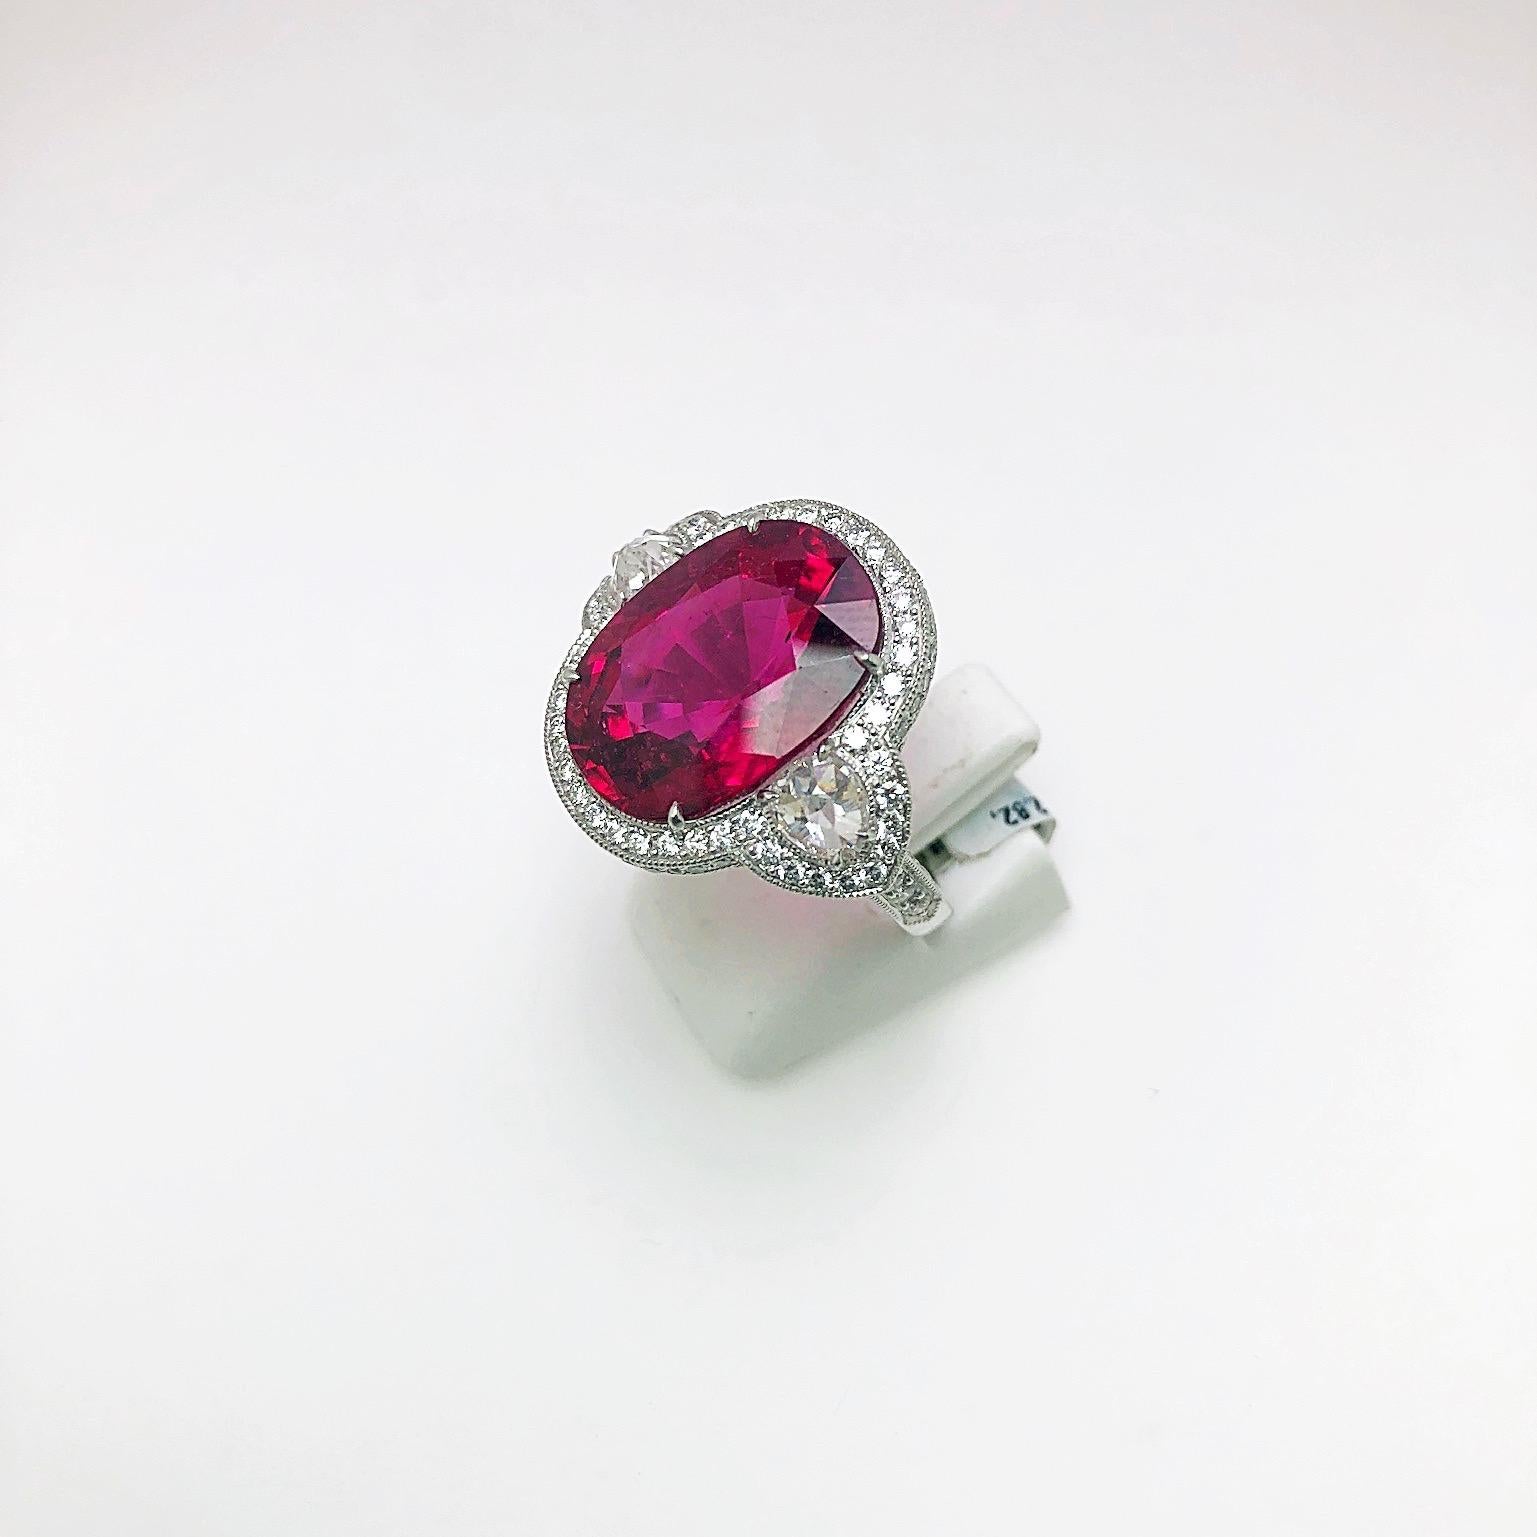 This stunning 12.82 carat oval cut rubelite ring is beautifully set in between two pear shape rose cut diamonds, which are surrounded by a flat wire micro-pavé setting.The setting is designed with a heart scroll on both sides of the shank. 
Rubelite